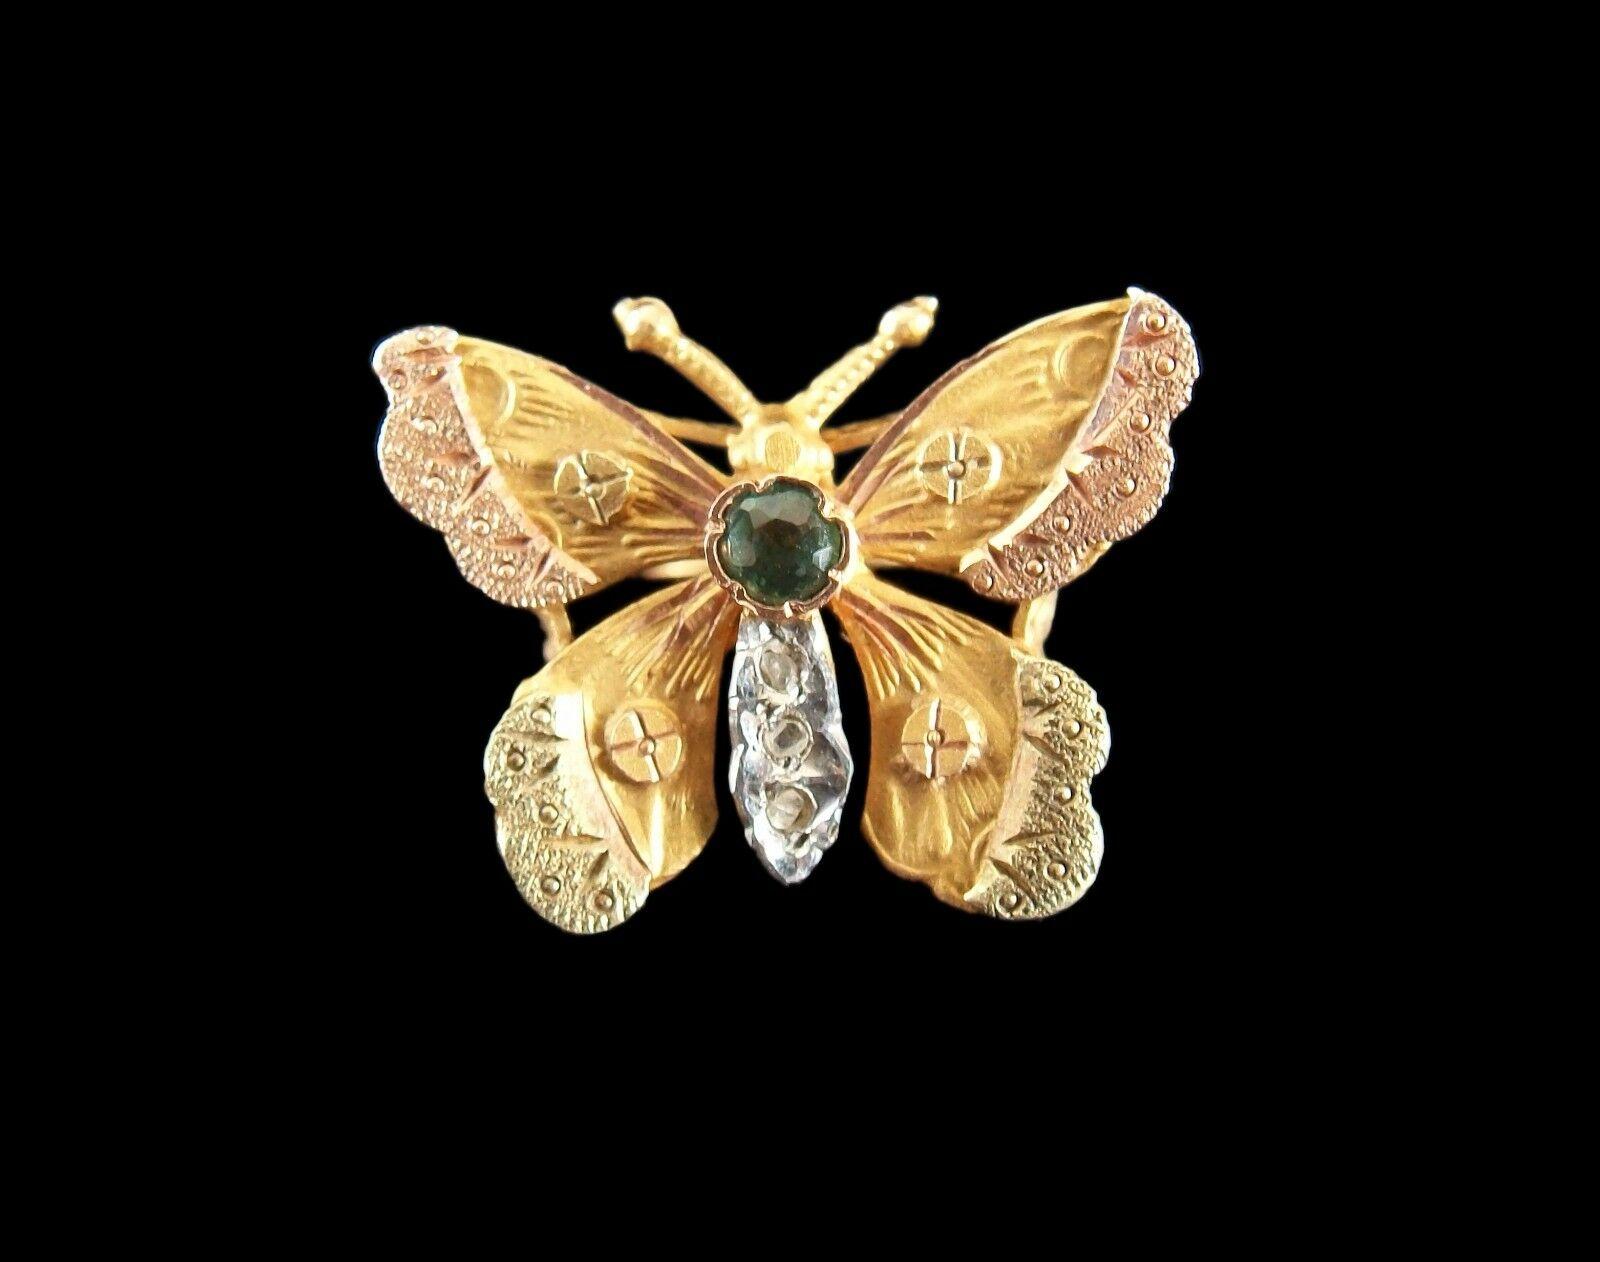 Art Nouveau Butterfly necklace slide/pendant - 18K yellow gold wings with pink and green gold wing tips and white gold body - one bezel set emerald and three small diamonds form the body - fine tooling to the wings - butterfly clips to the back -